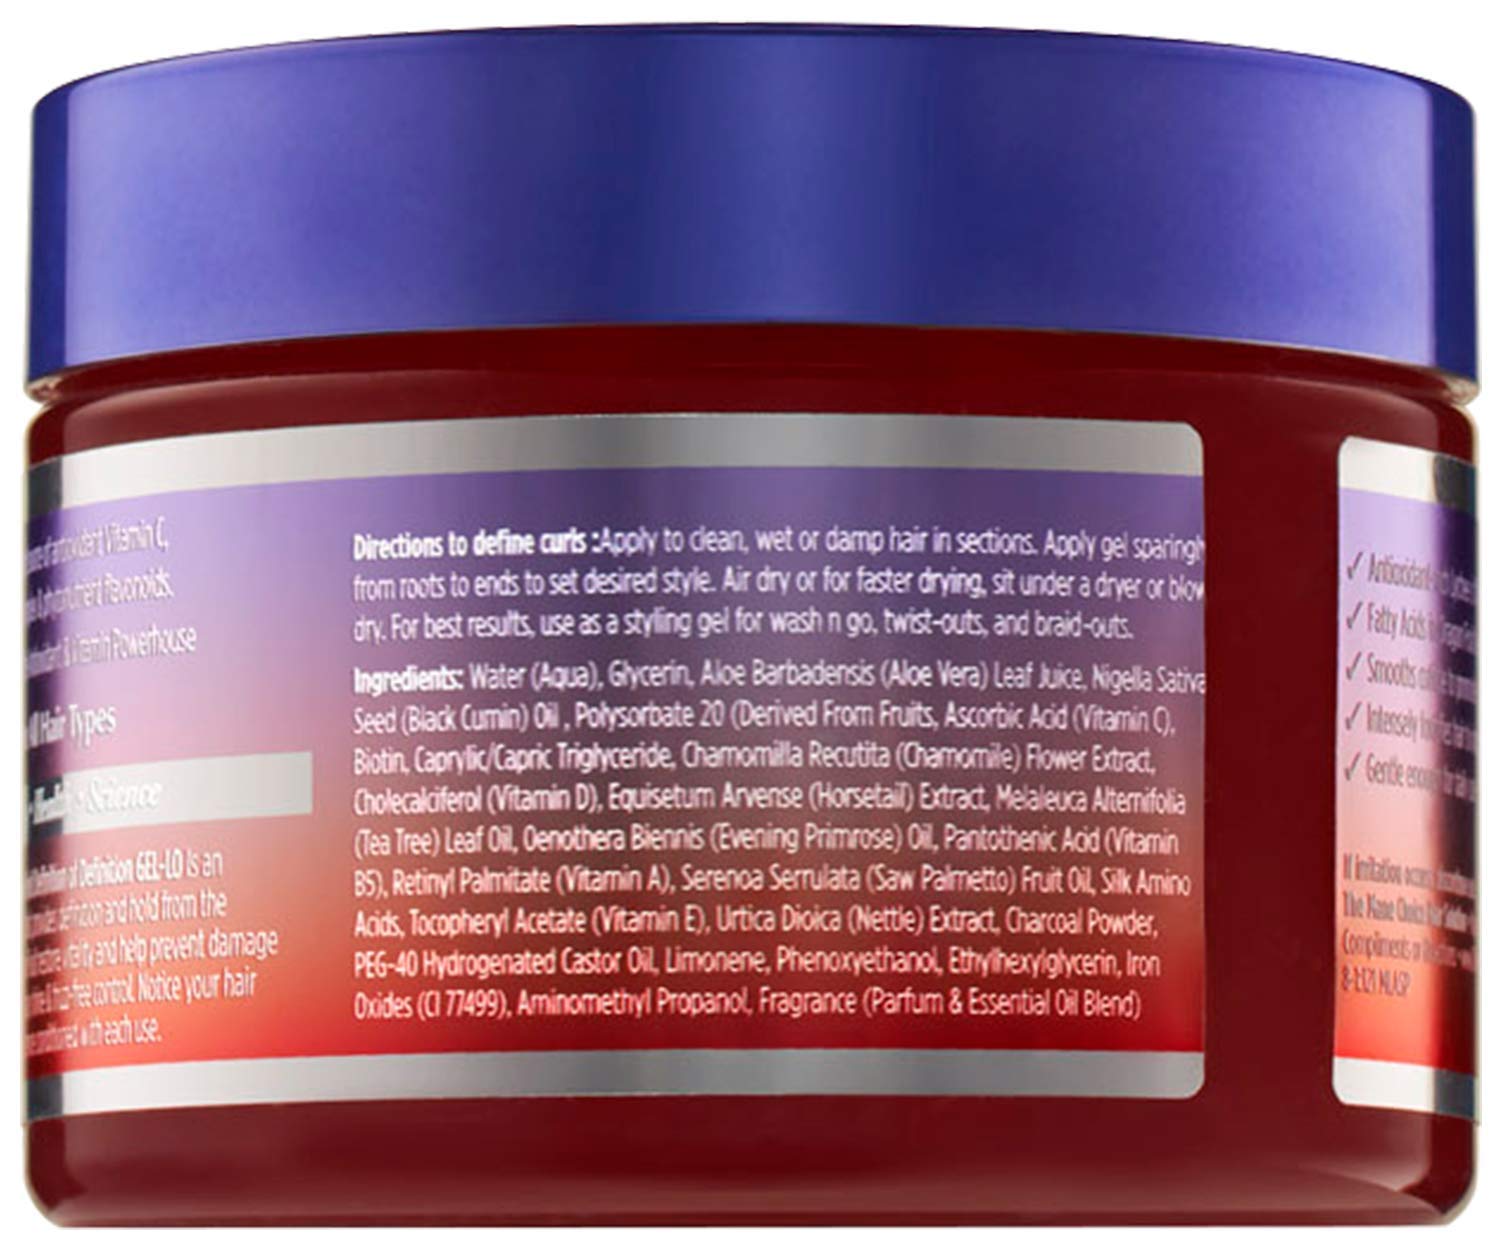 The Mane Choice Mane choice exotic cool-laid definition gel-lo luscious lychee & dragon fruit, 12 Ounce Find Your New Look Today!